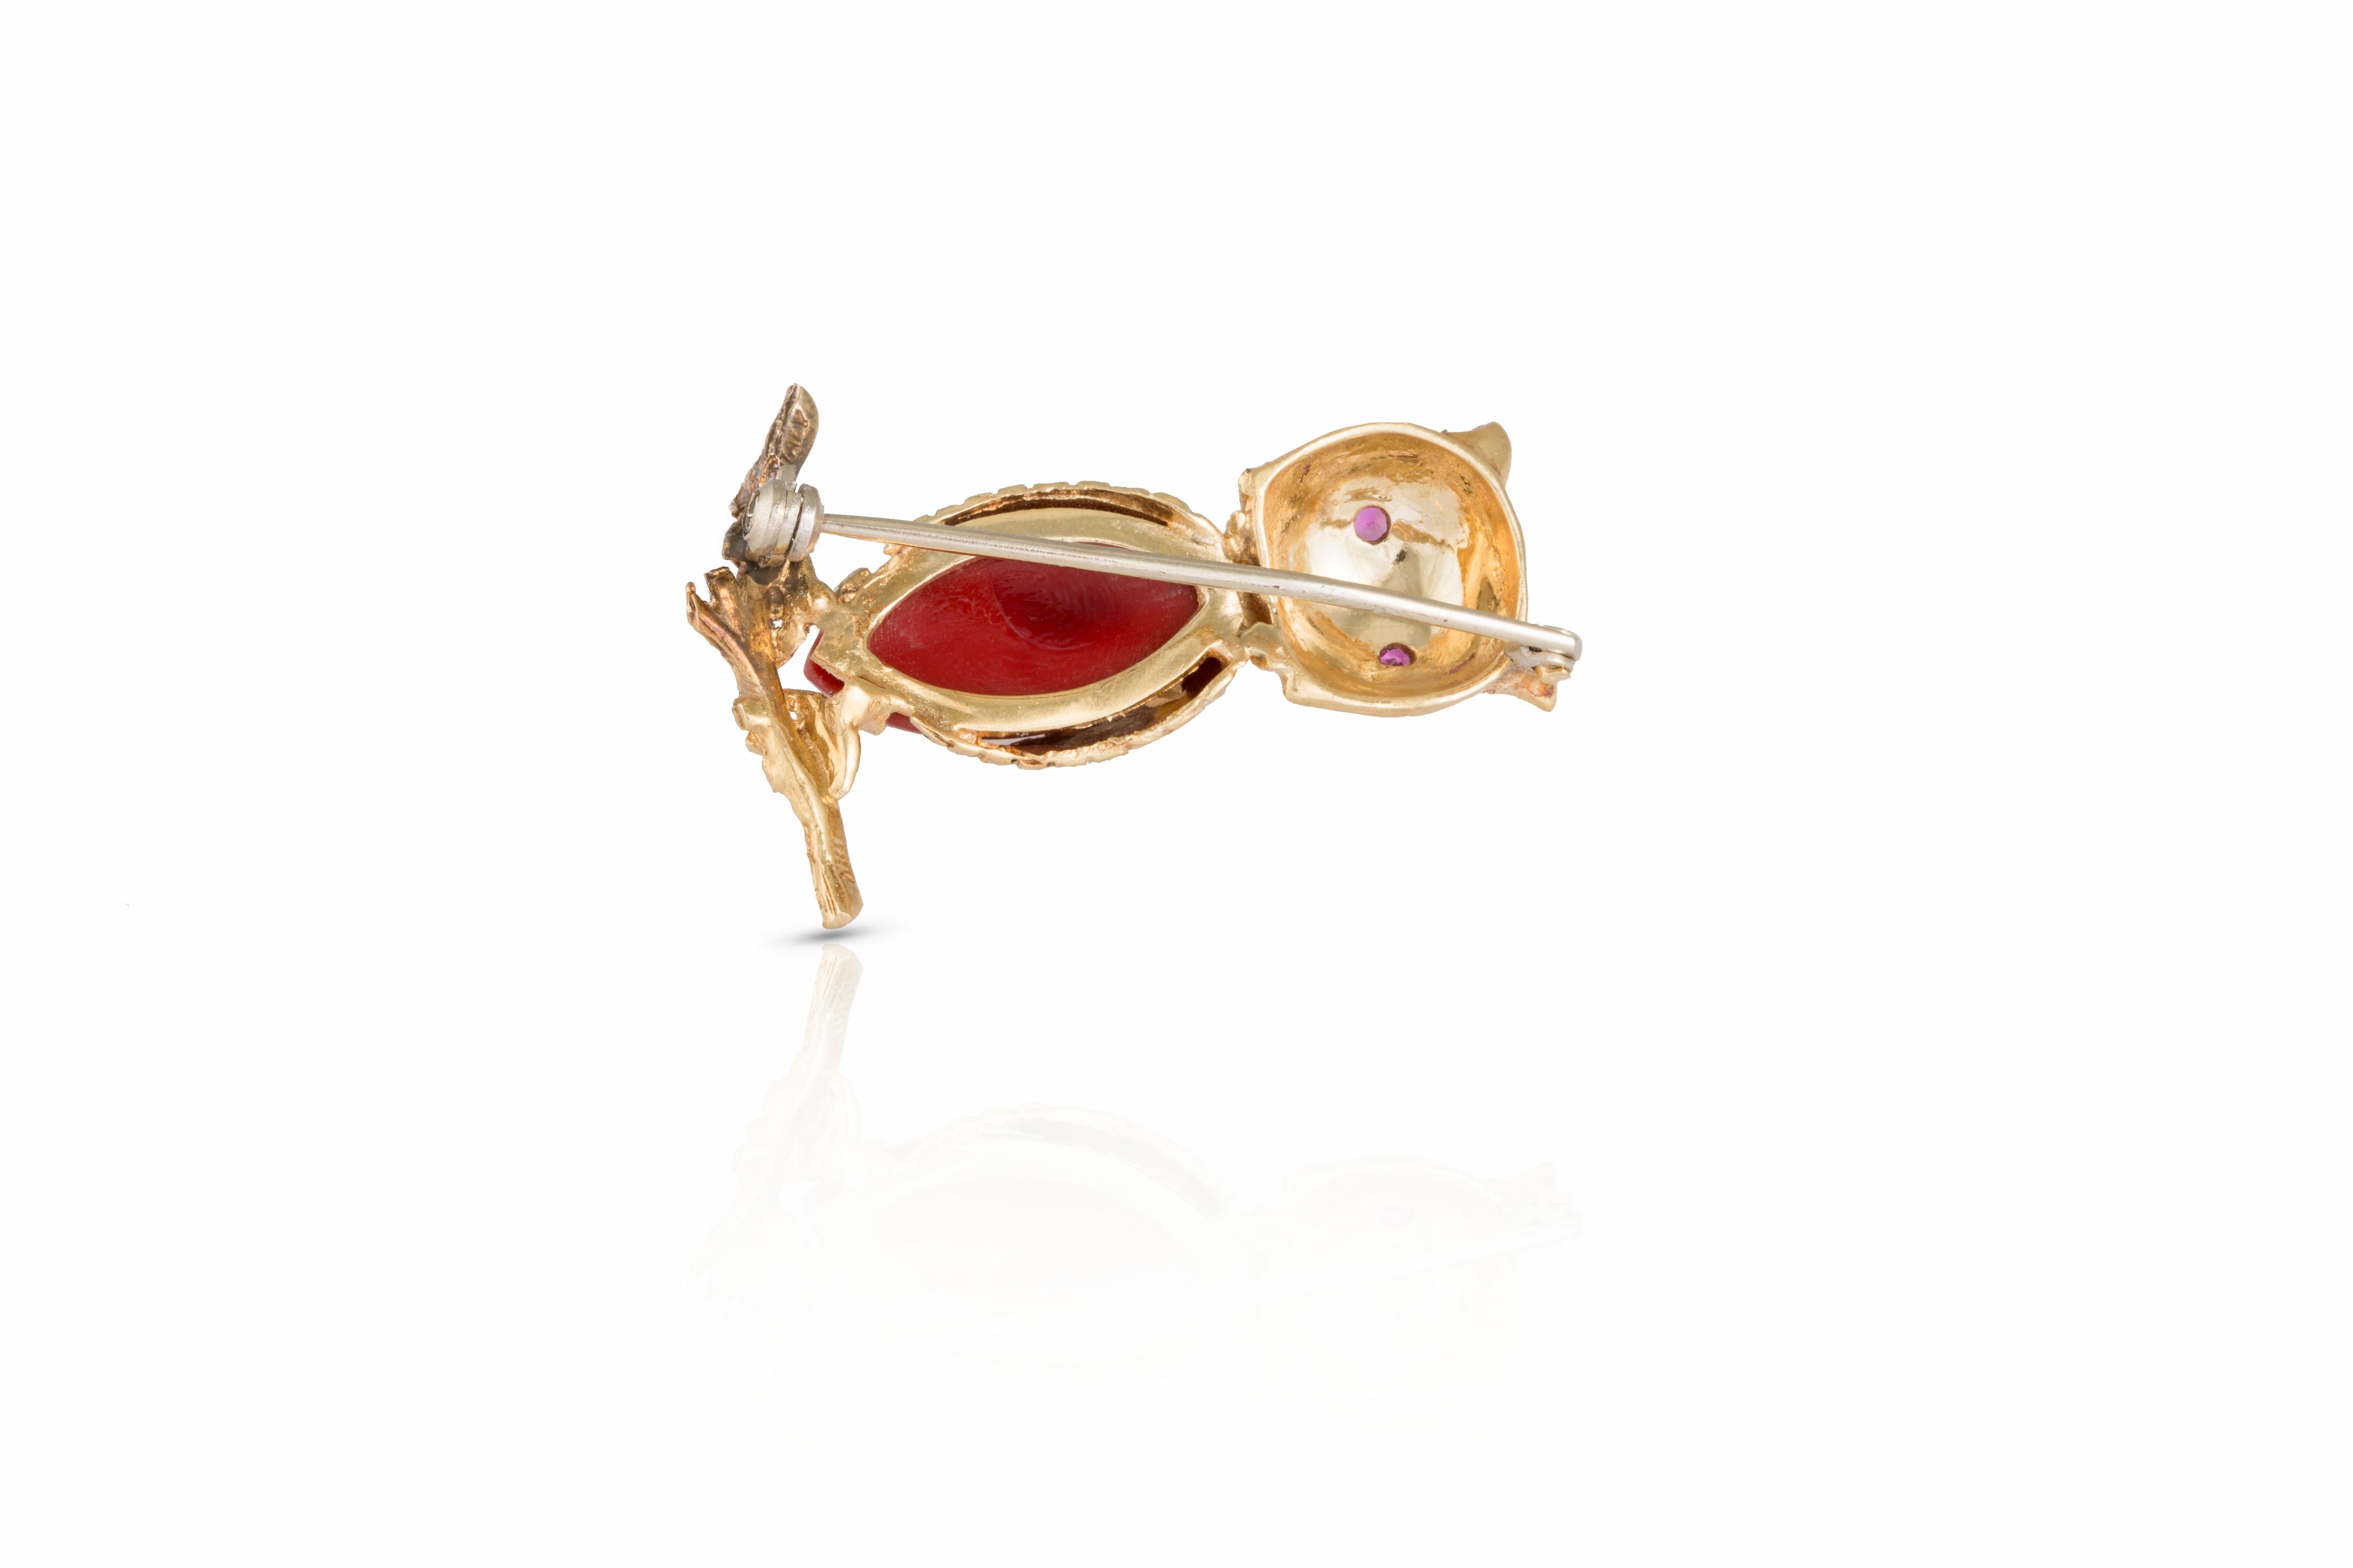 Brilliant Cut Vintage 18ct Gold Owl Brooch with Red Glass and Ruby